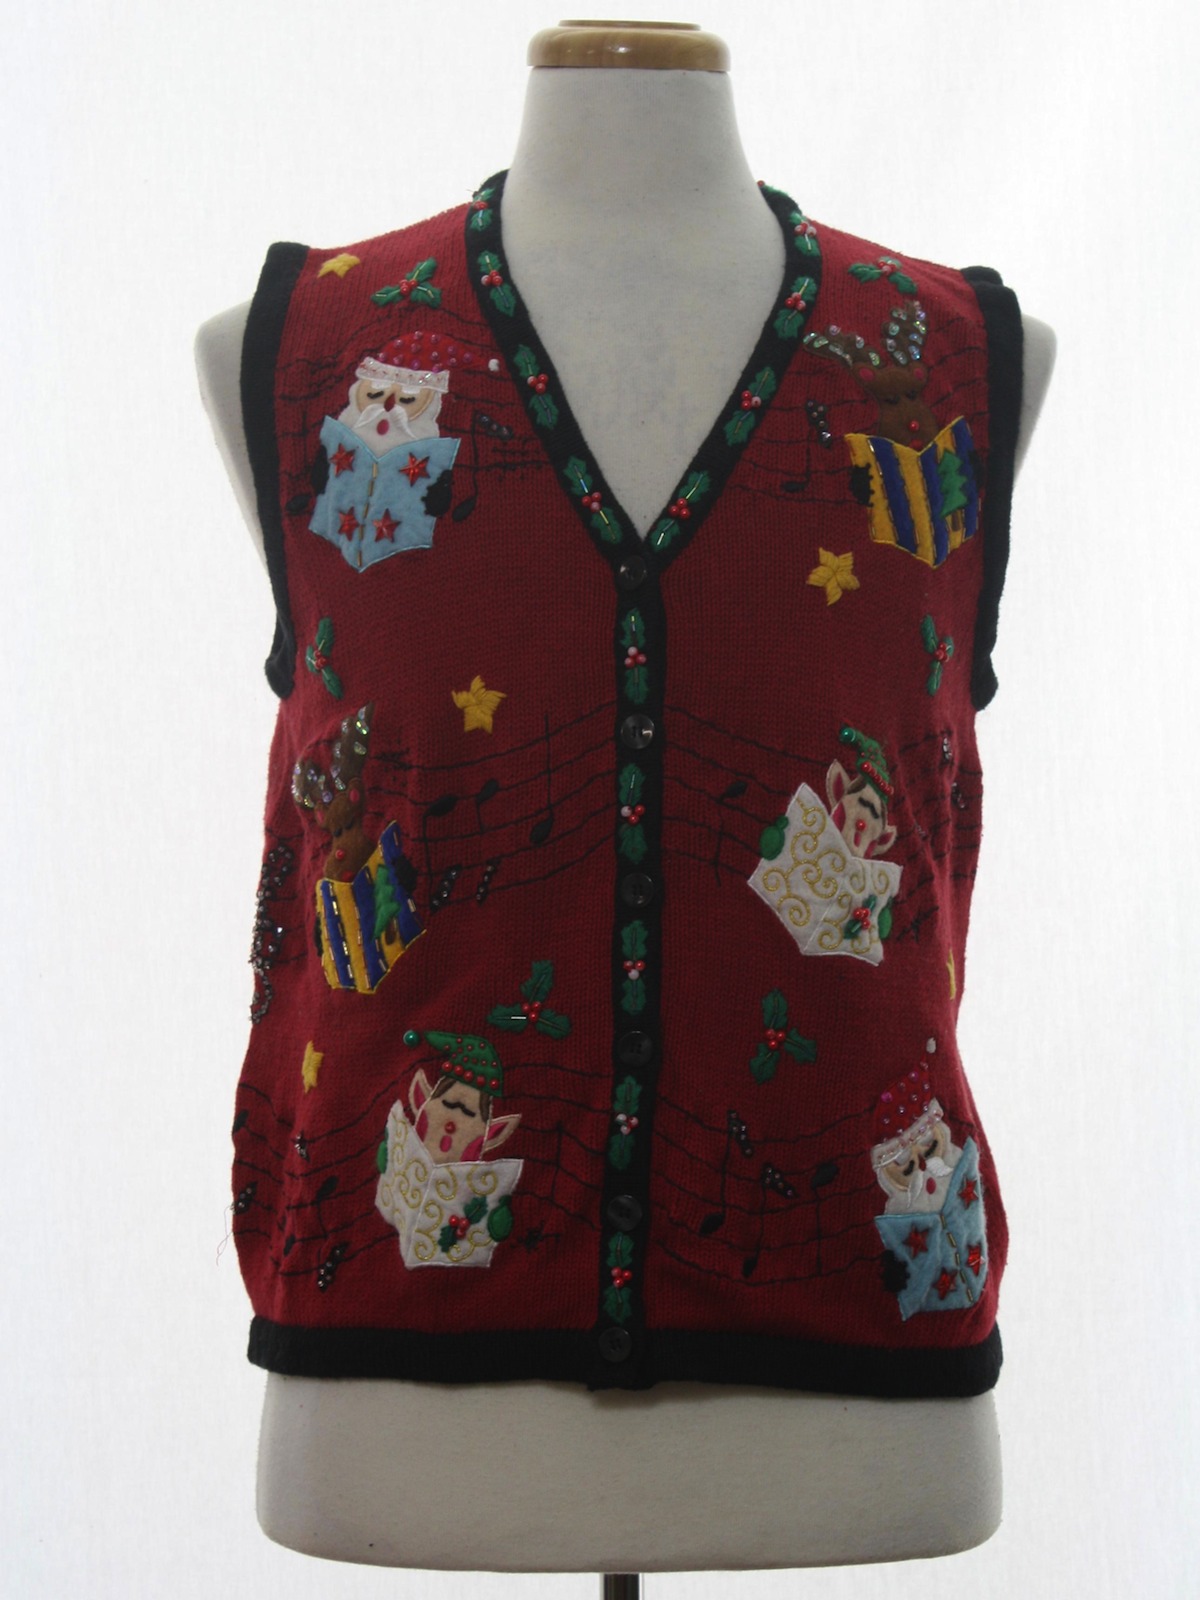 Womens Ugly Christmas Sweater Vest: -Bobbie Brooks- Womens holiday red ...